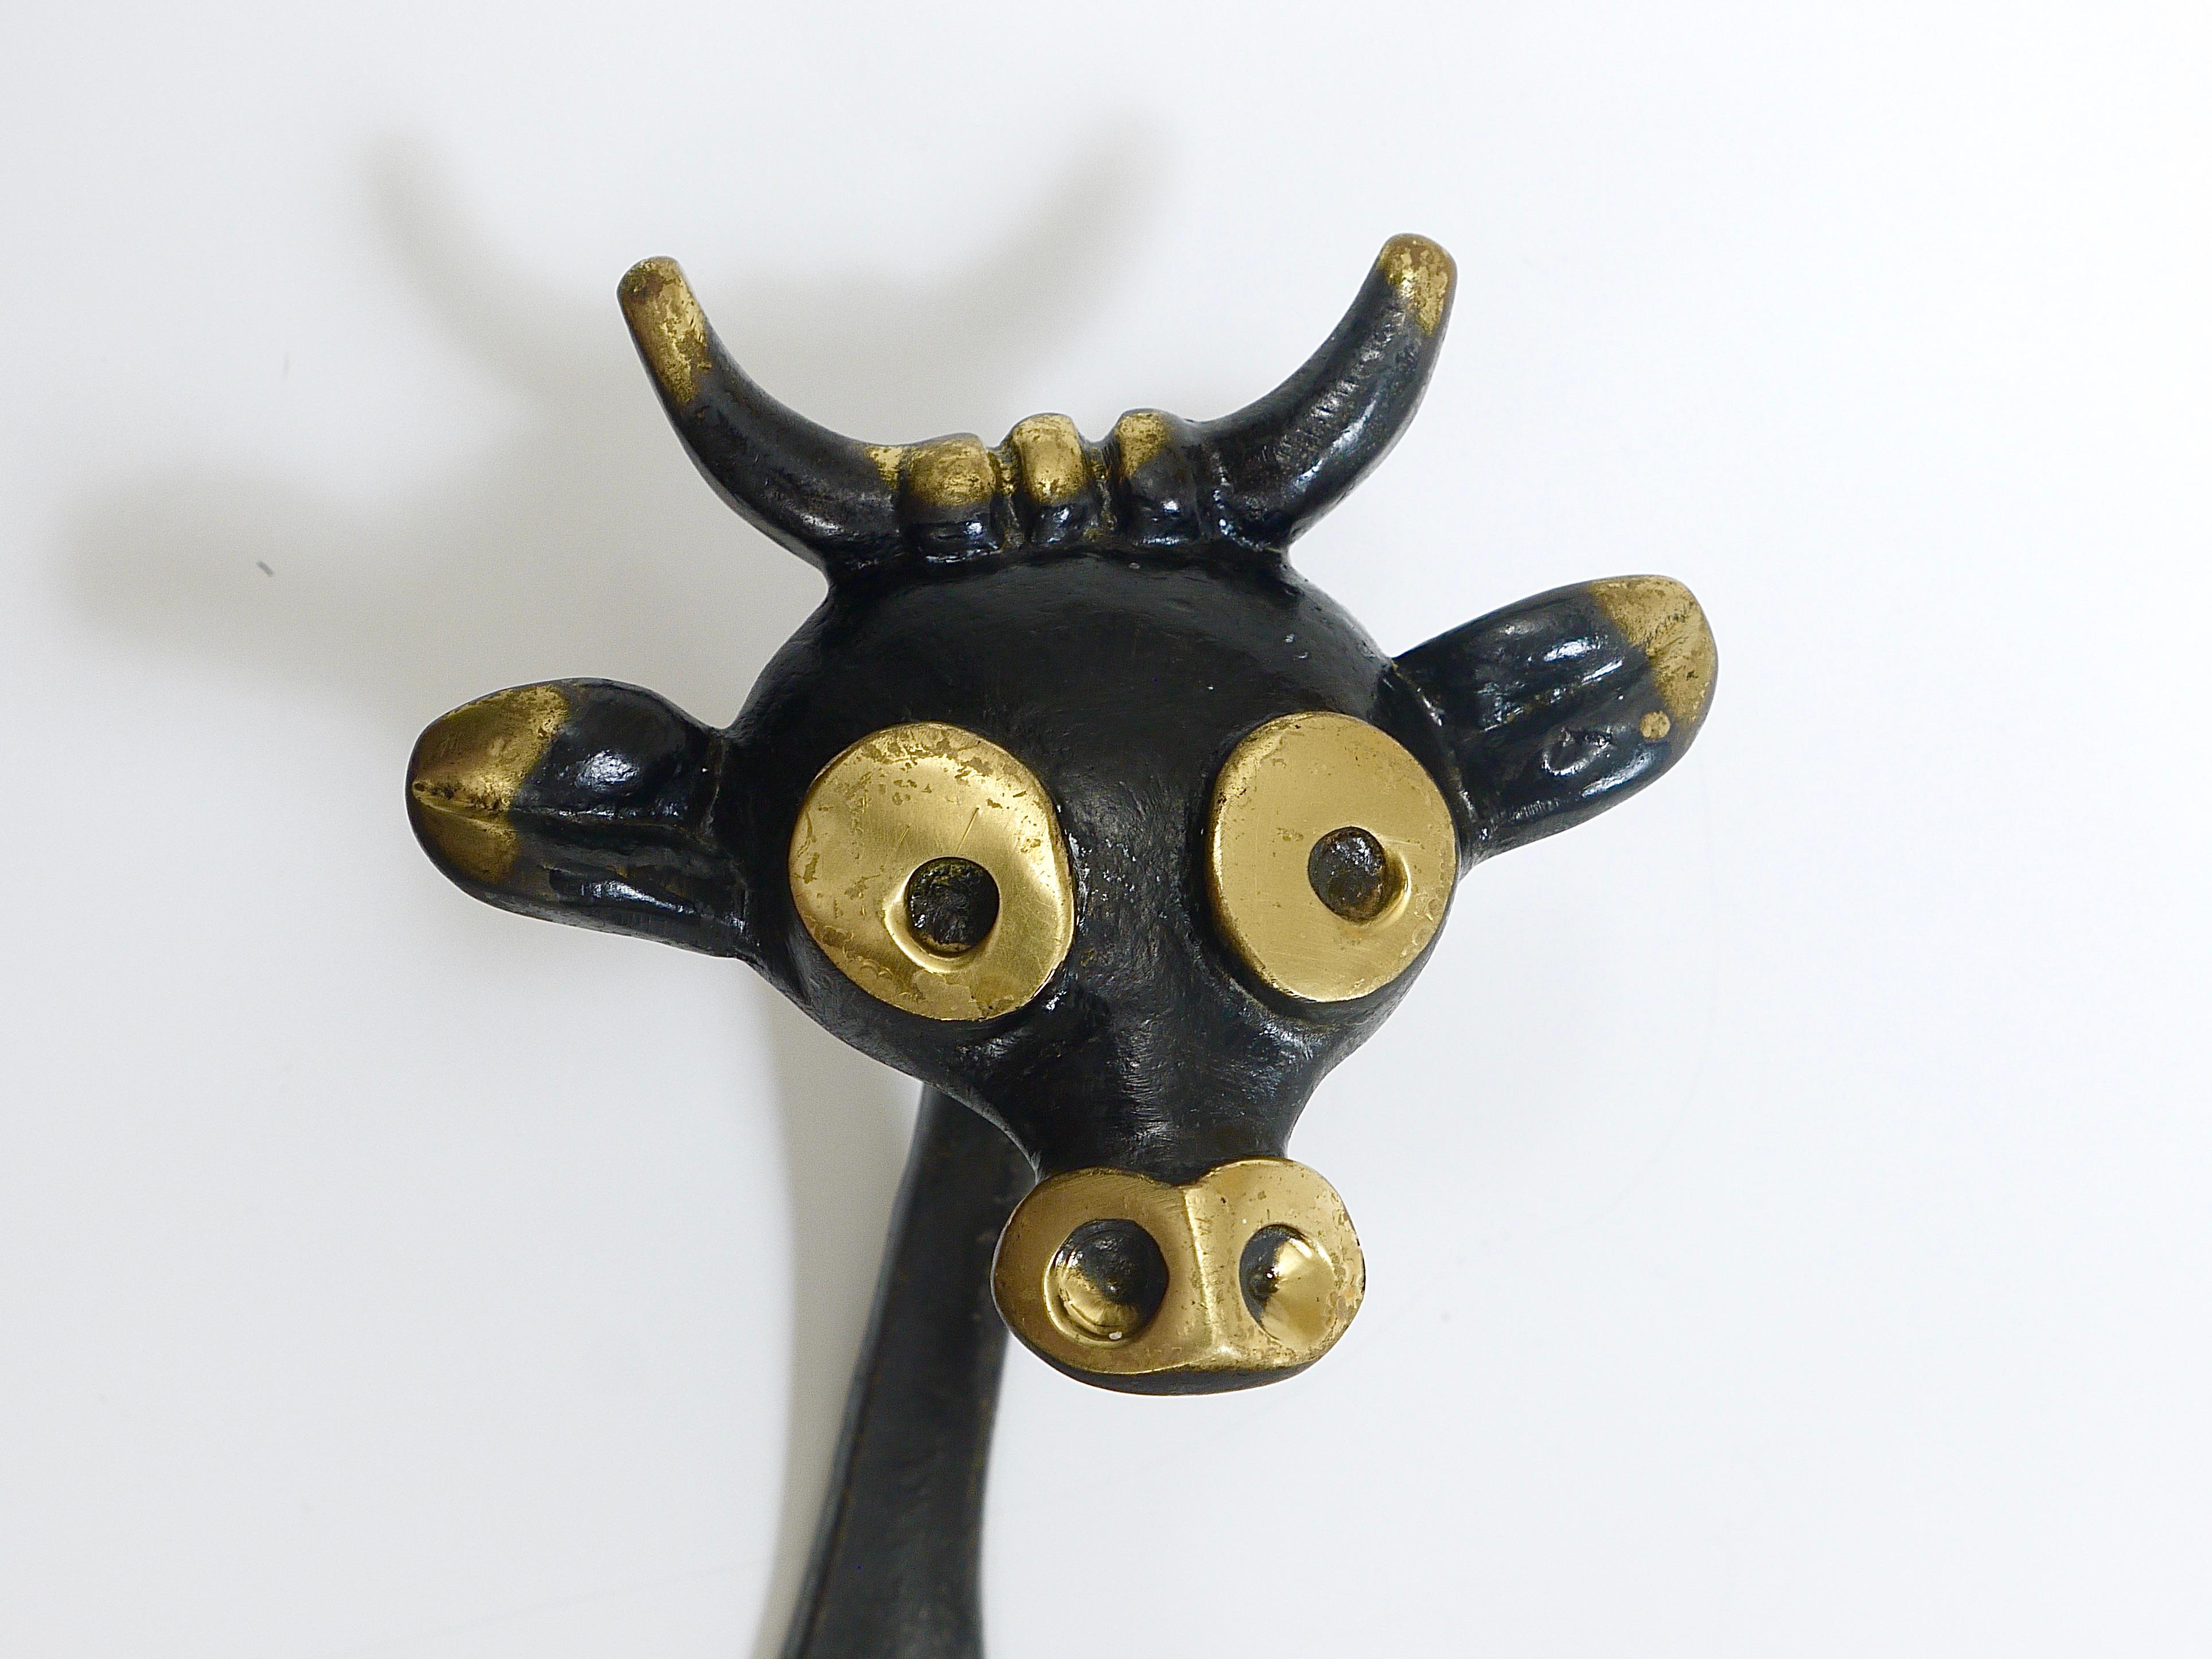 A lovely Austrian modernist animal coat wall hook, displaying a cow. A humorous design by Walter Bosse, executed by Hertha Baller Austria in the 1950s. Made of black finished and partly polished brass. In good condition with nice patina. The hook